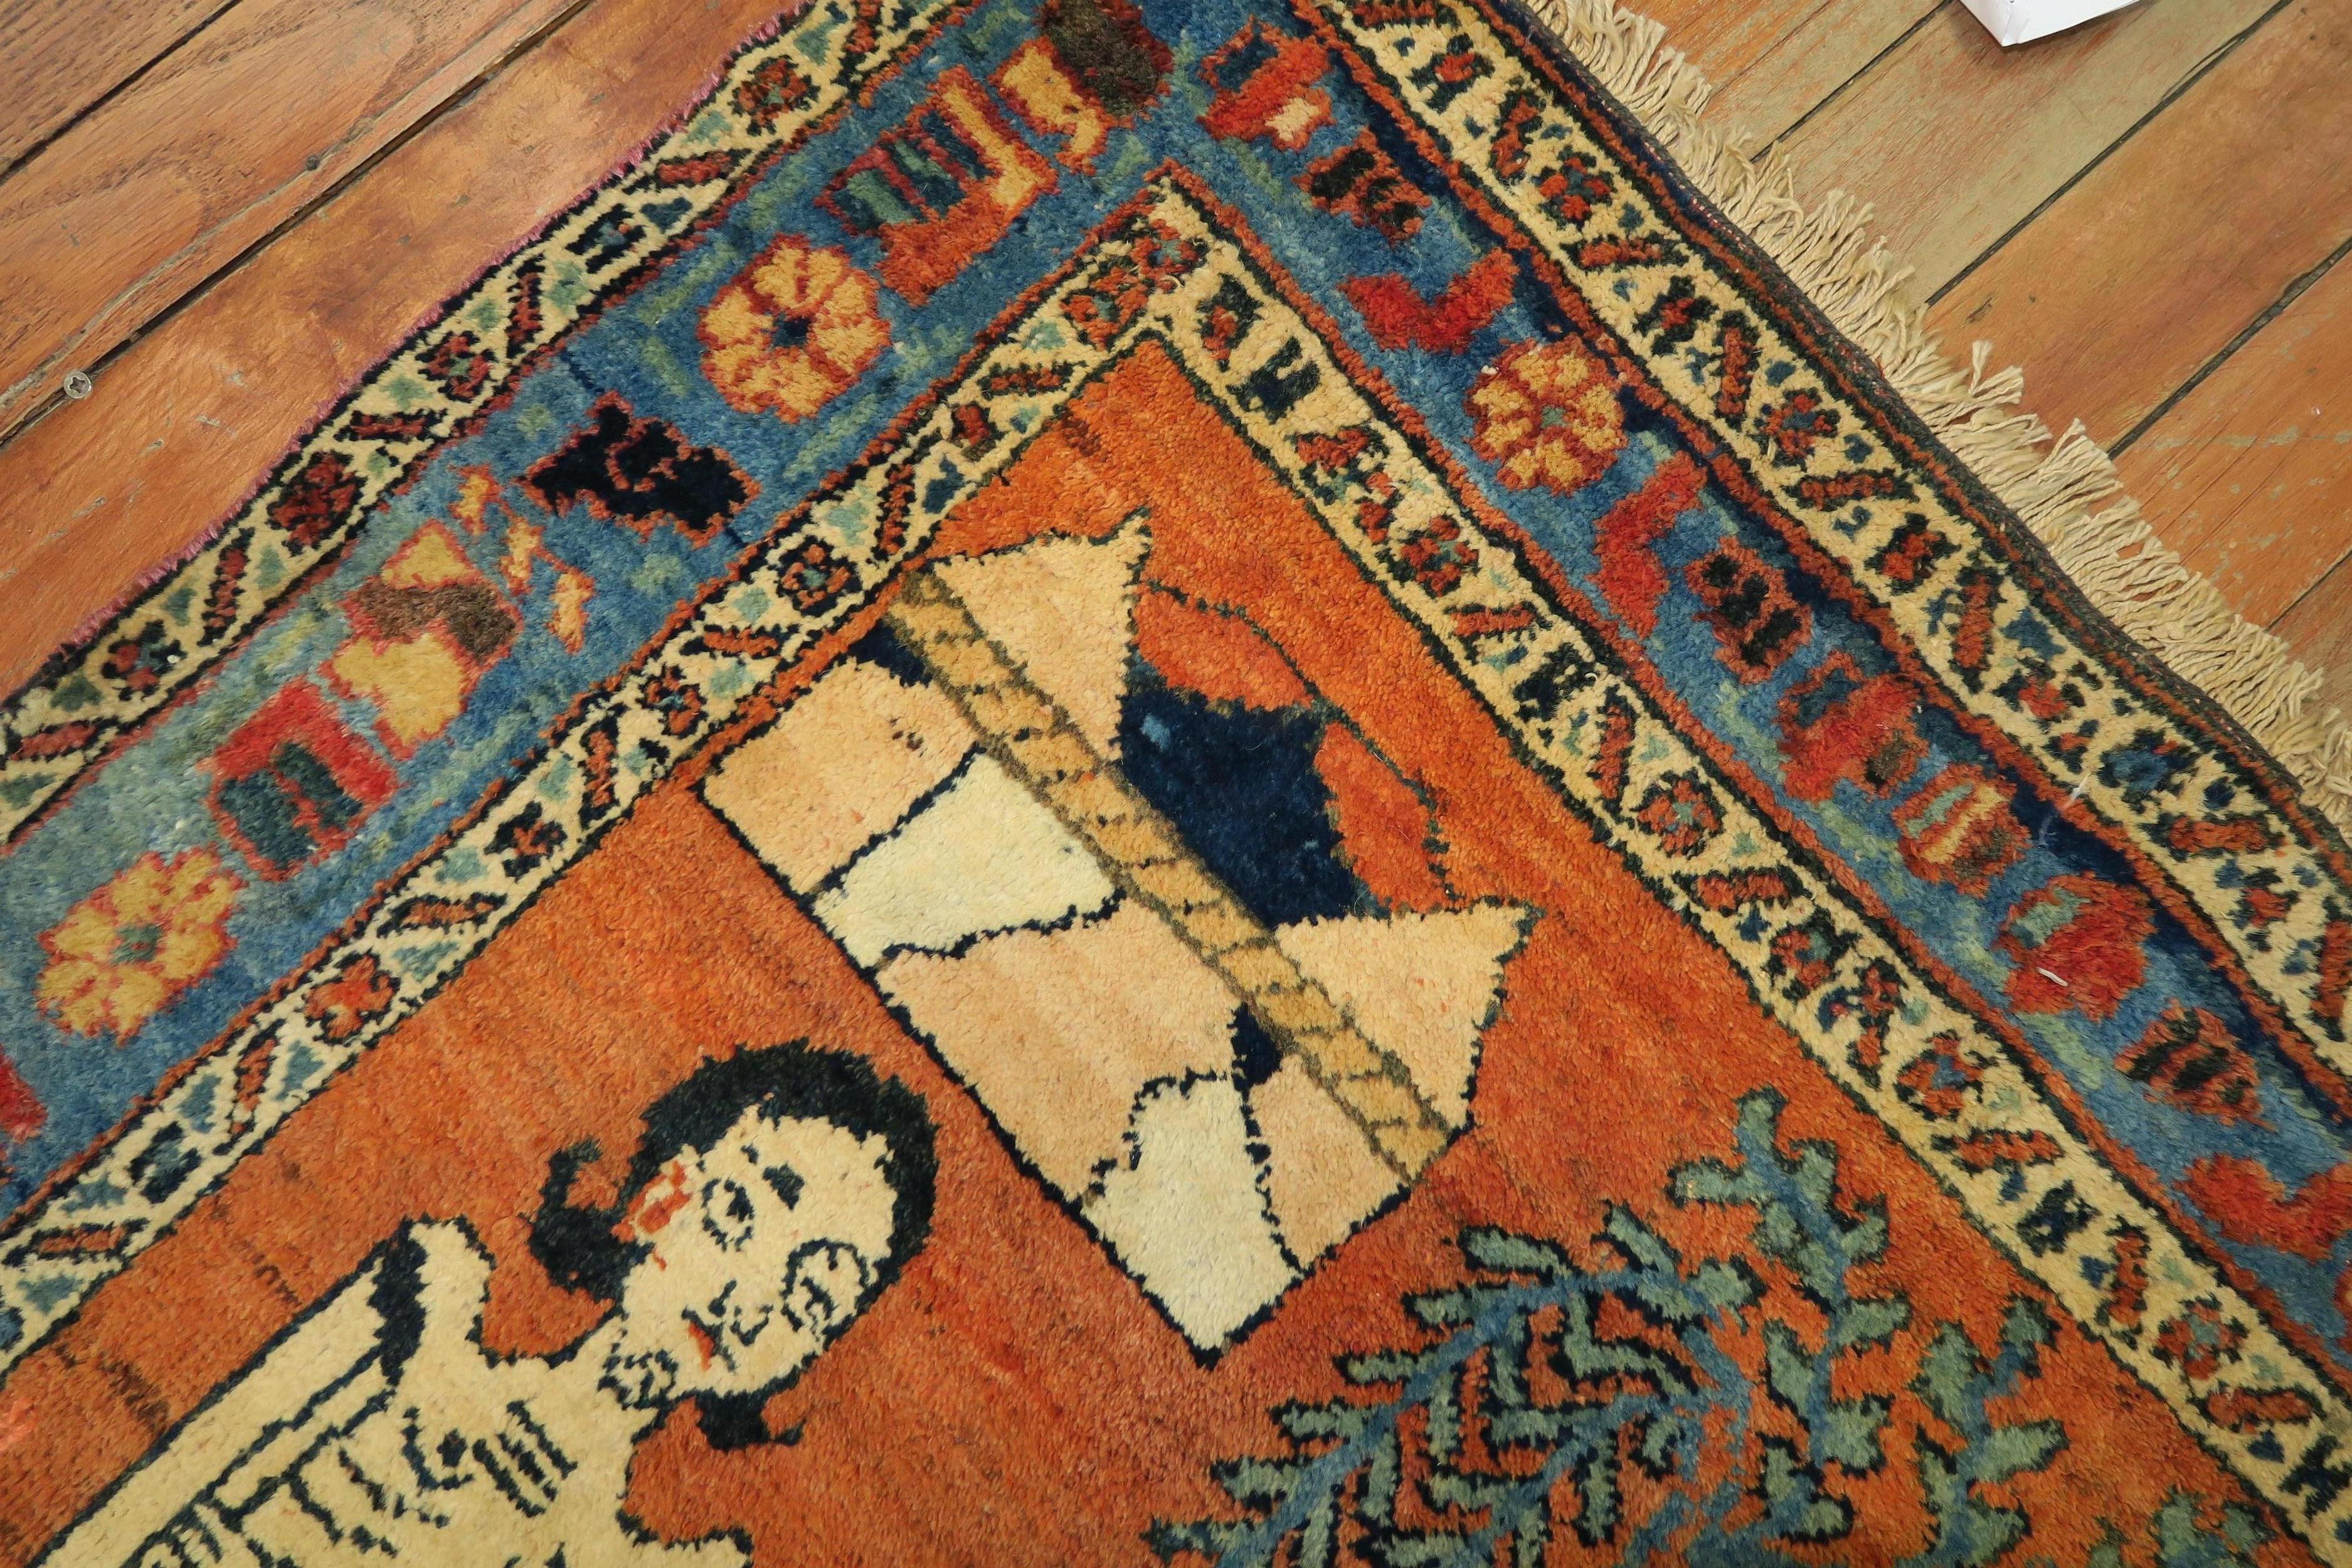 Hand-Woven Whimsical Conversational Pumpkin Antique Persian Pictorial 20th Century Rug